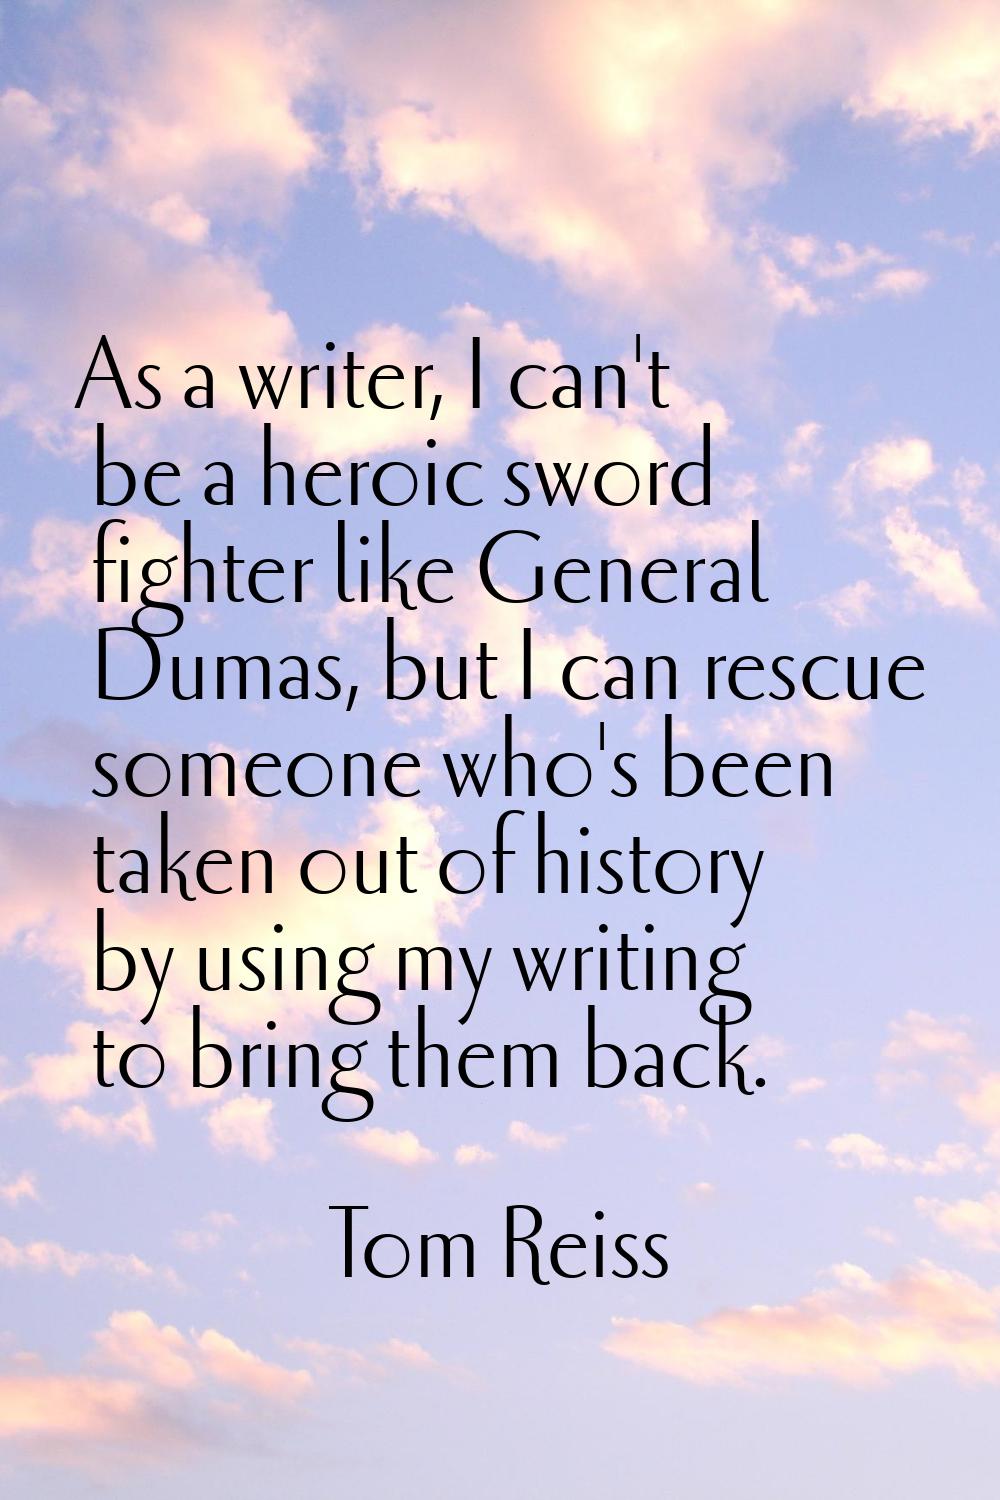 As a writer, I can't be a heroic sword fighter like General Dumas, but I can rescue someone who's b